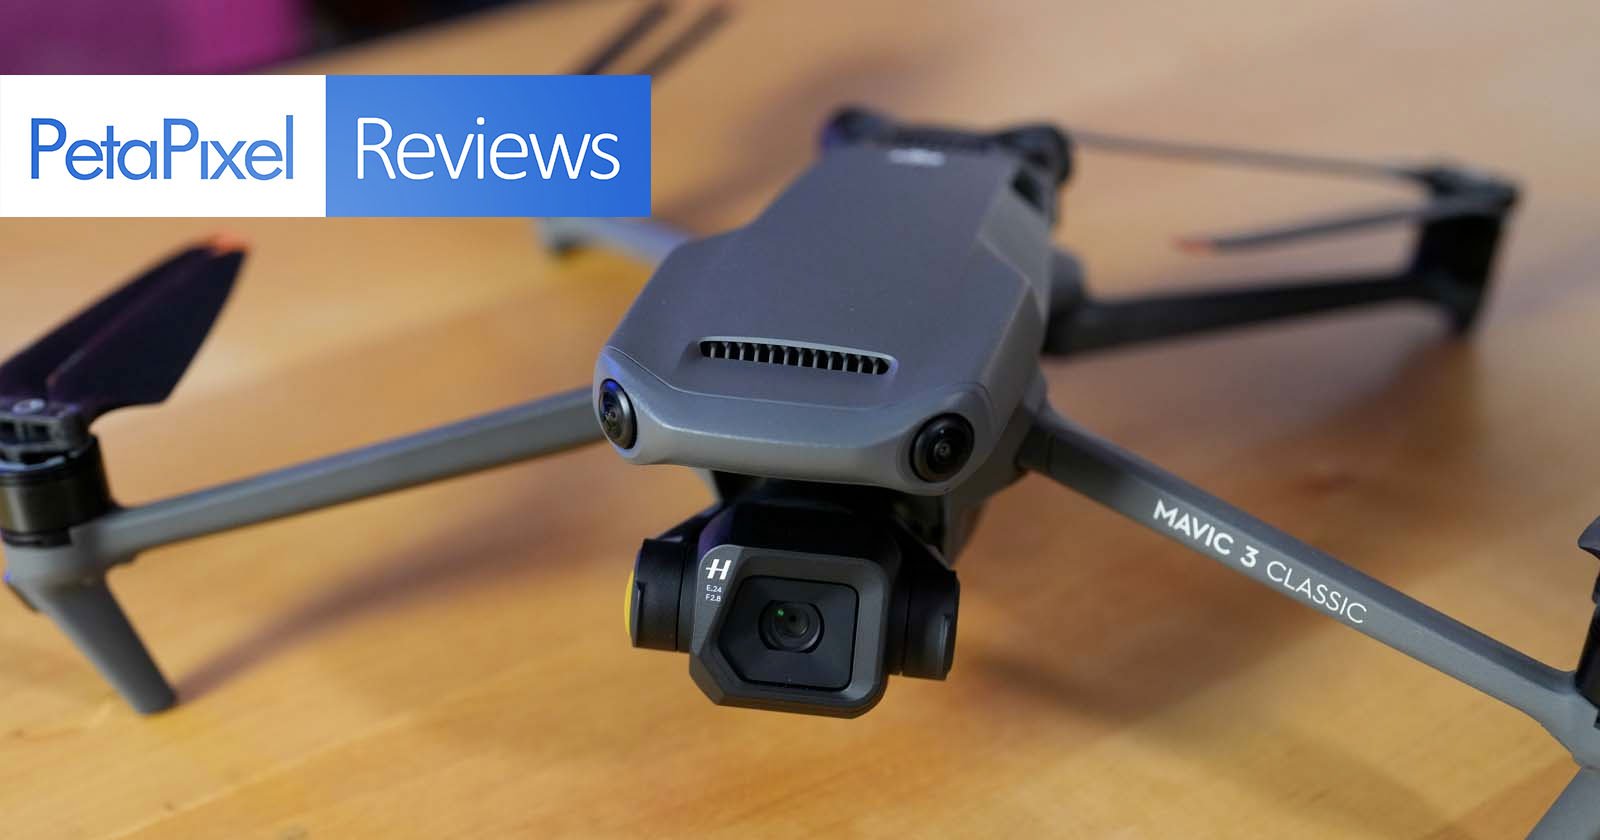 DJI Mavic 3 Classic Review: DJI's Most Compelling Drone Right Now 